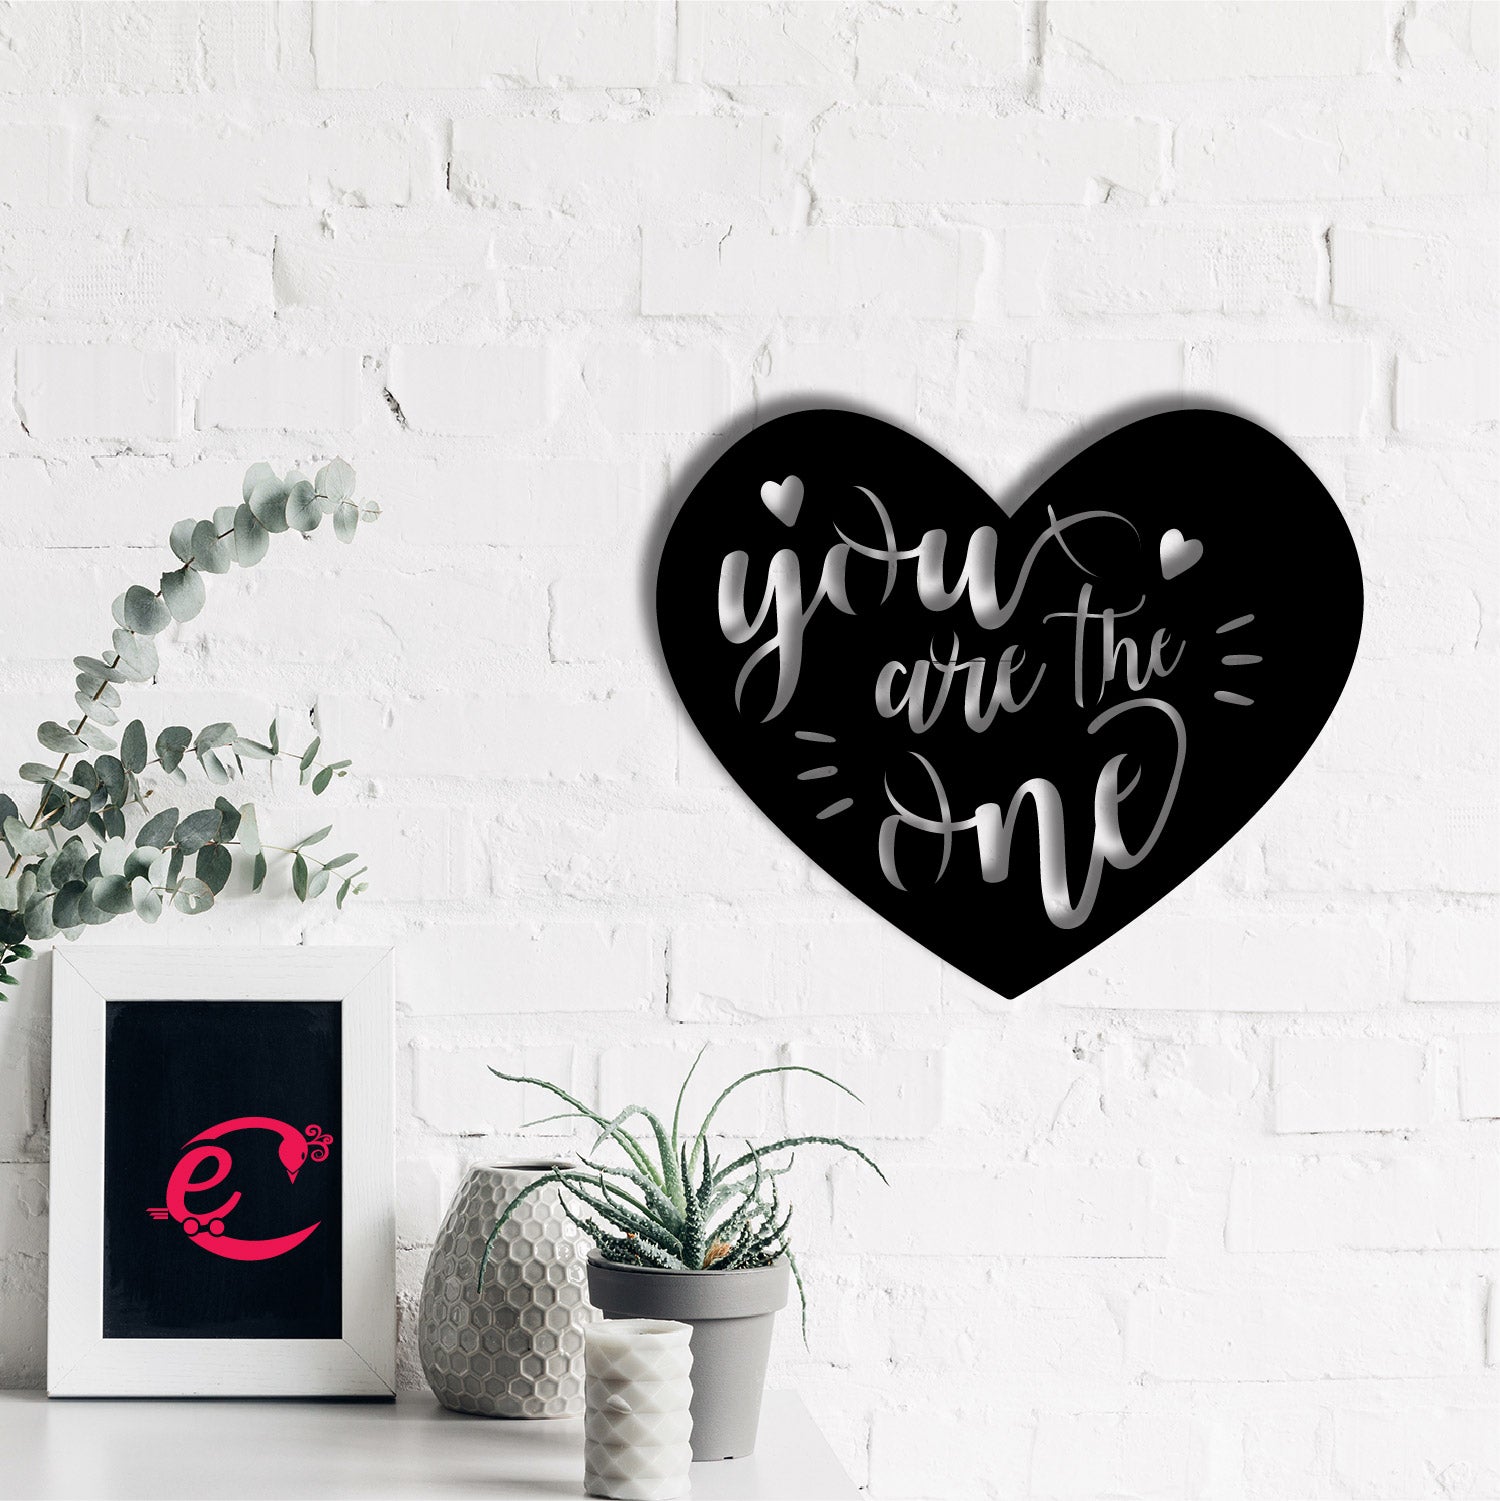 "You are the One" Love Theme Black Engineered Wood Wall Art Cutout, Ready to Hang Home Decor